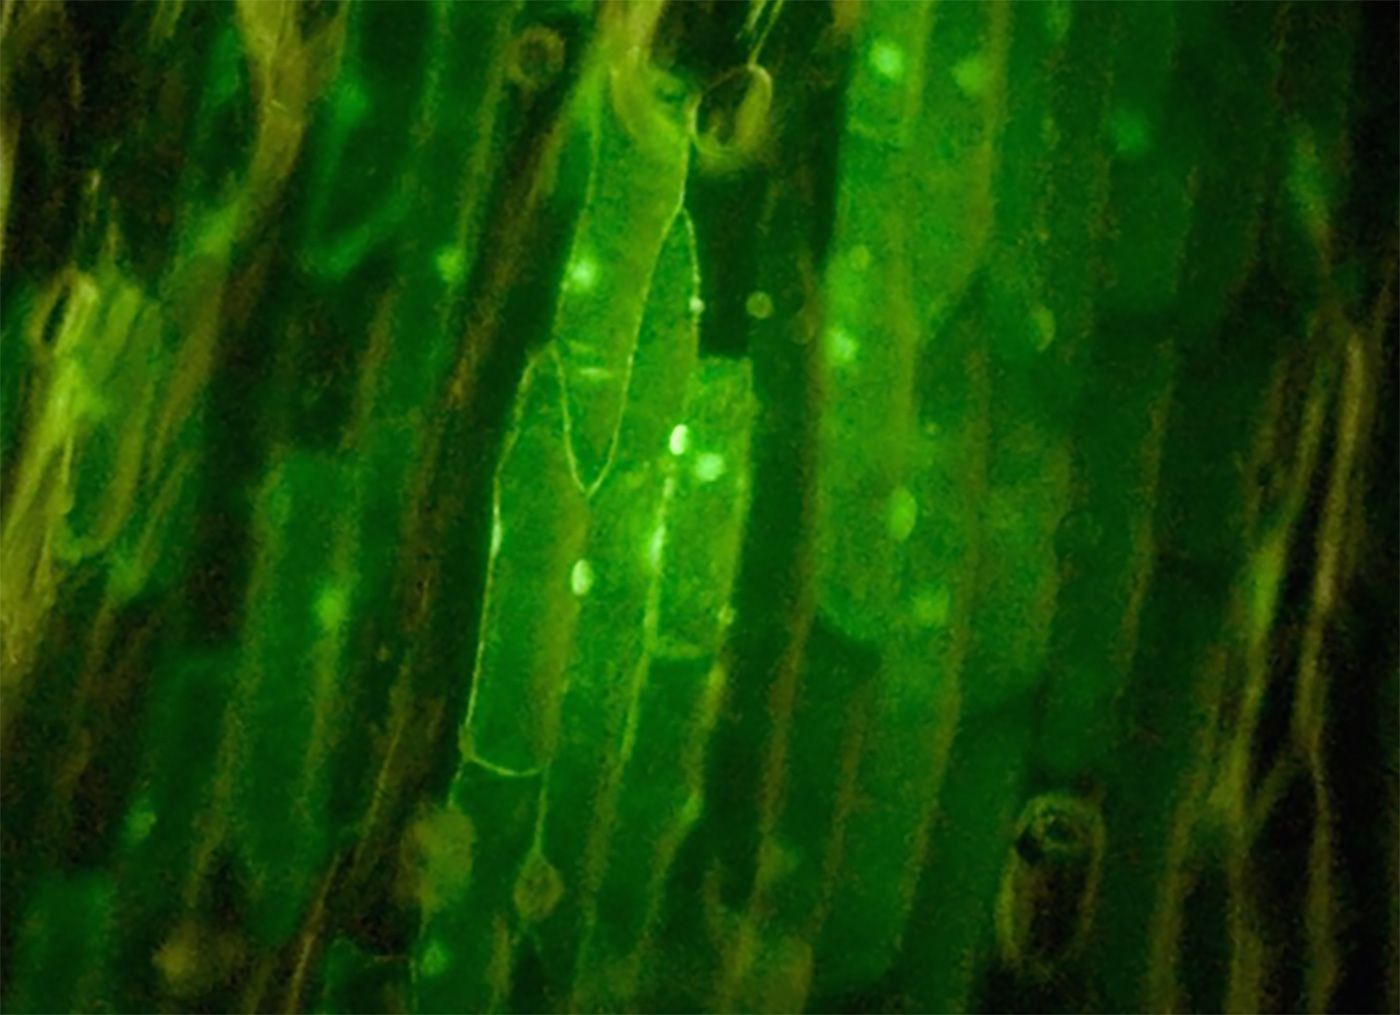 Cropped image showing GFP expression in onion cells.